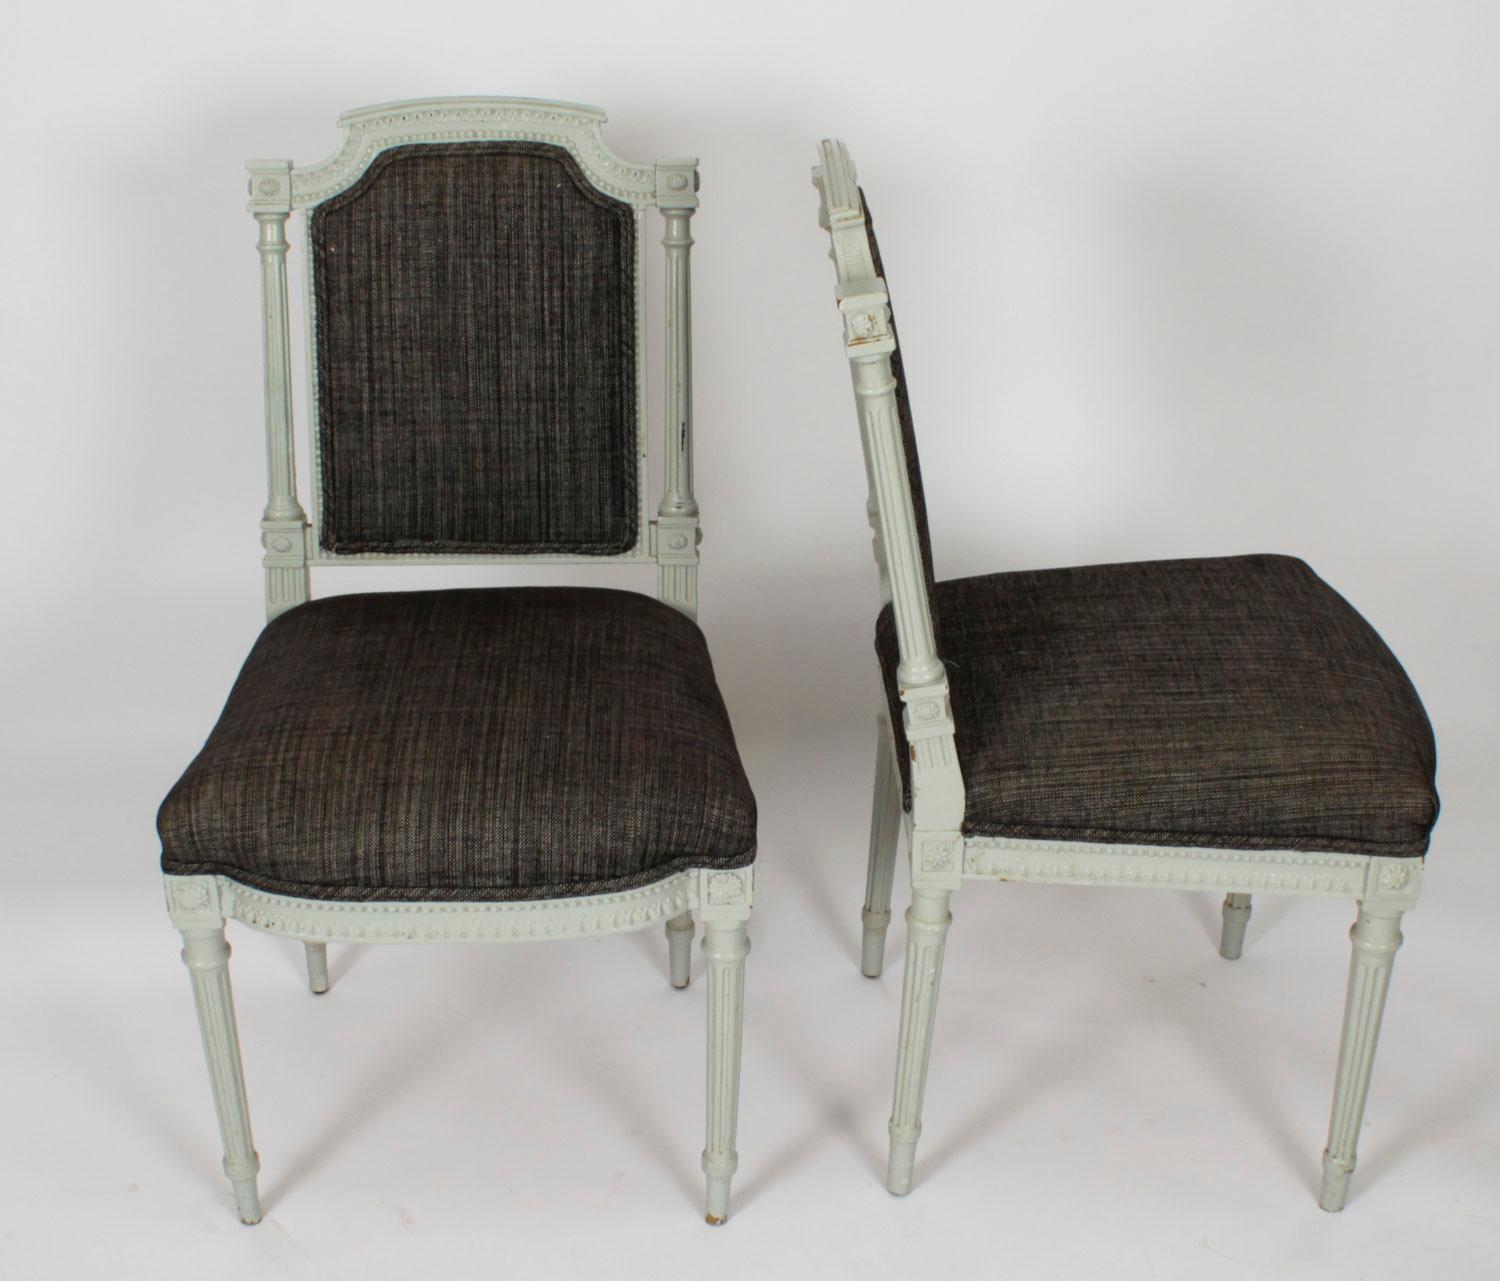 An absolutely fantastic set of 10 vintage Louis XVI Revival blue-grey painted dining  chairs.

These chairs have been masterfully crafted in beautiful solid beech and the finish and attention to detail on display are truly breathtaking.

The blue